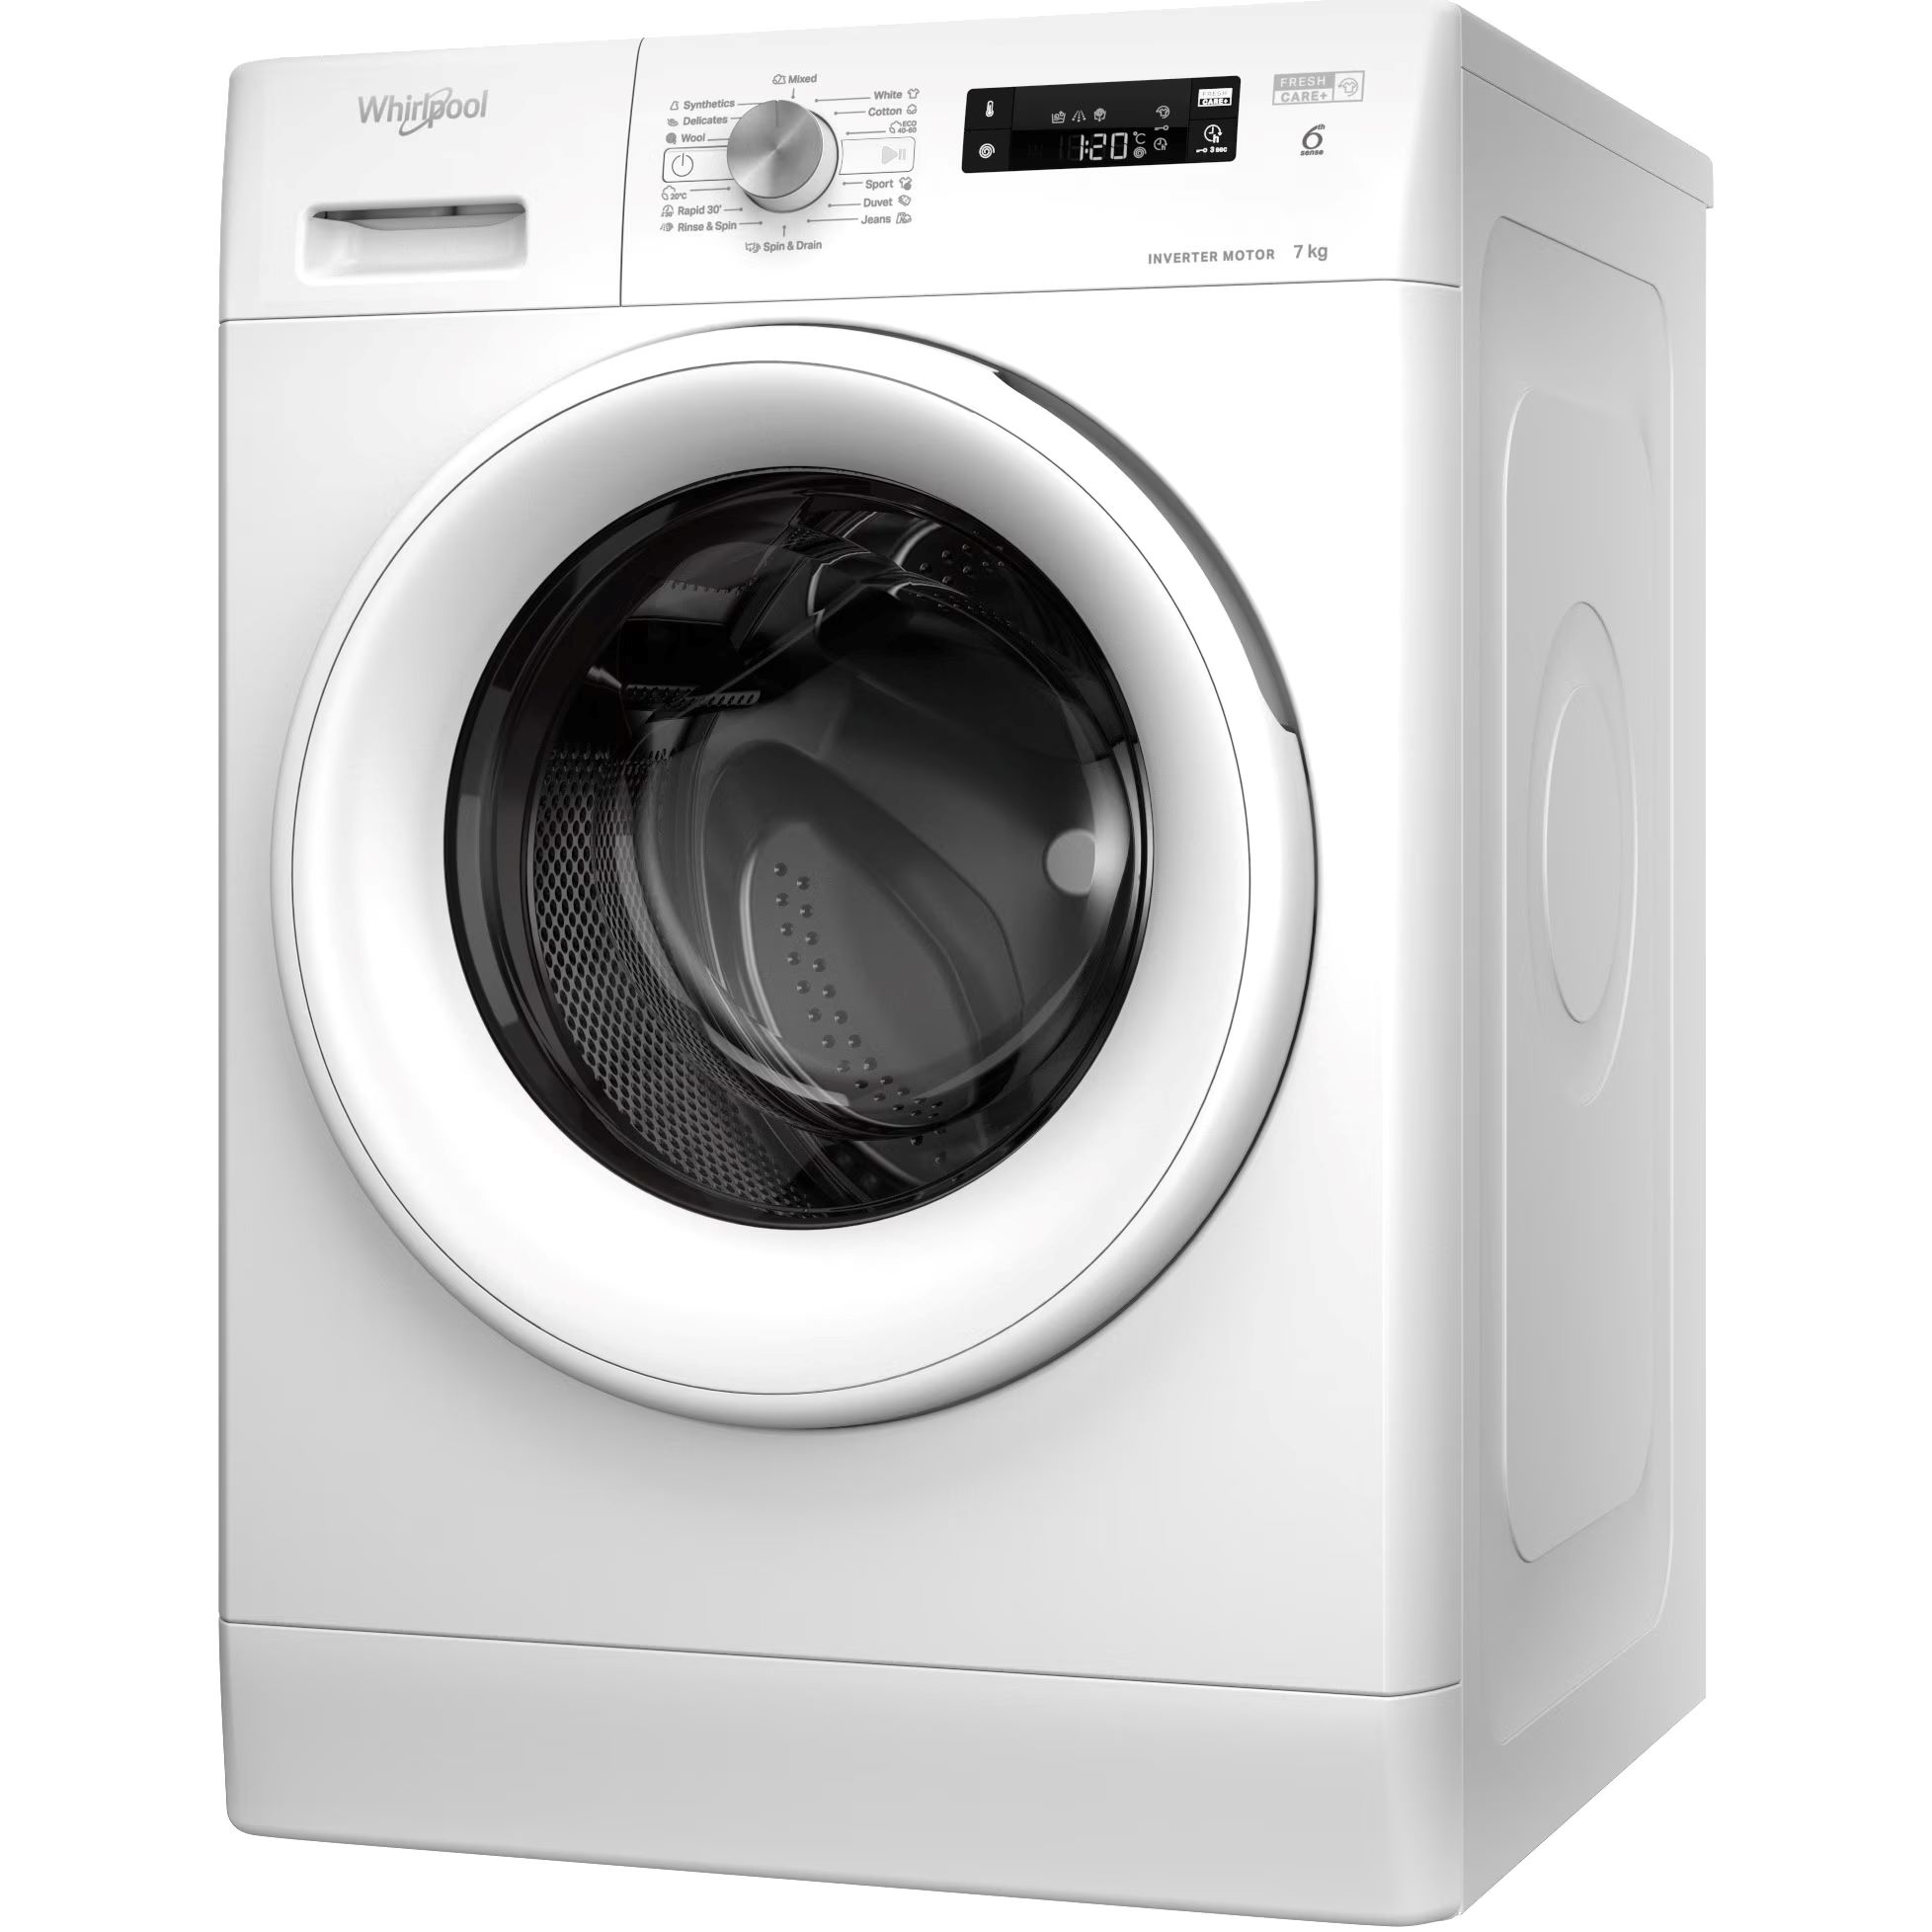 How To Fix The Error Code F23 For Whirlpool Dryer